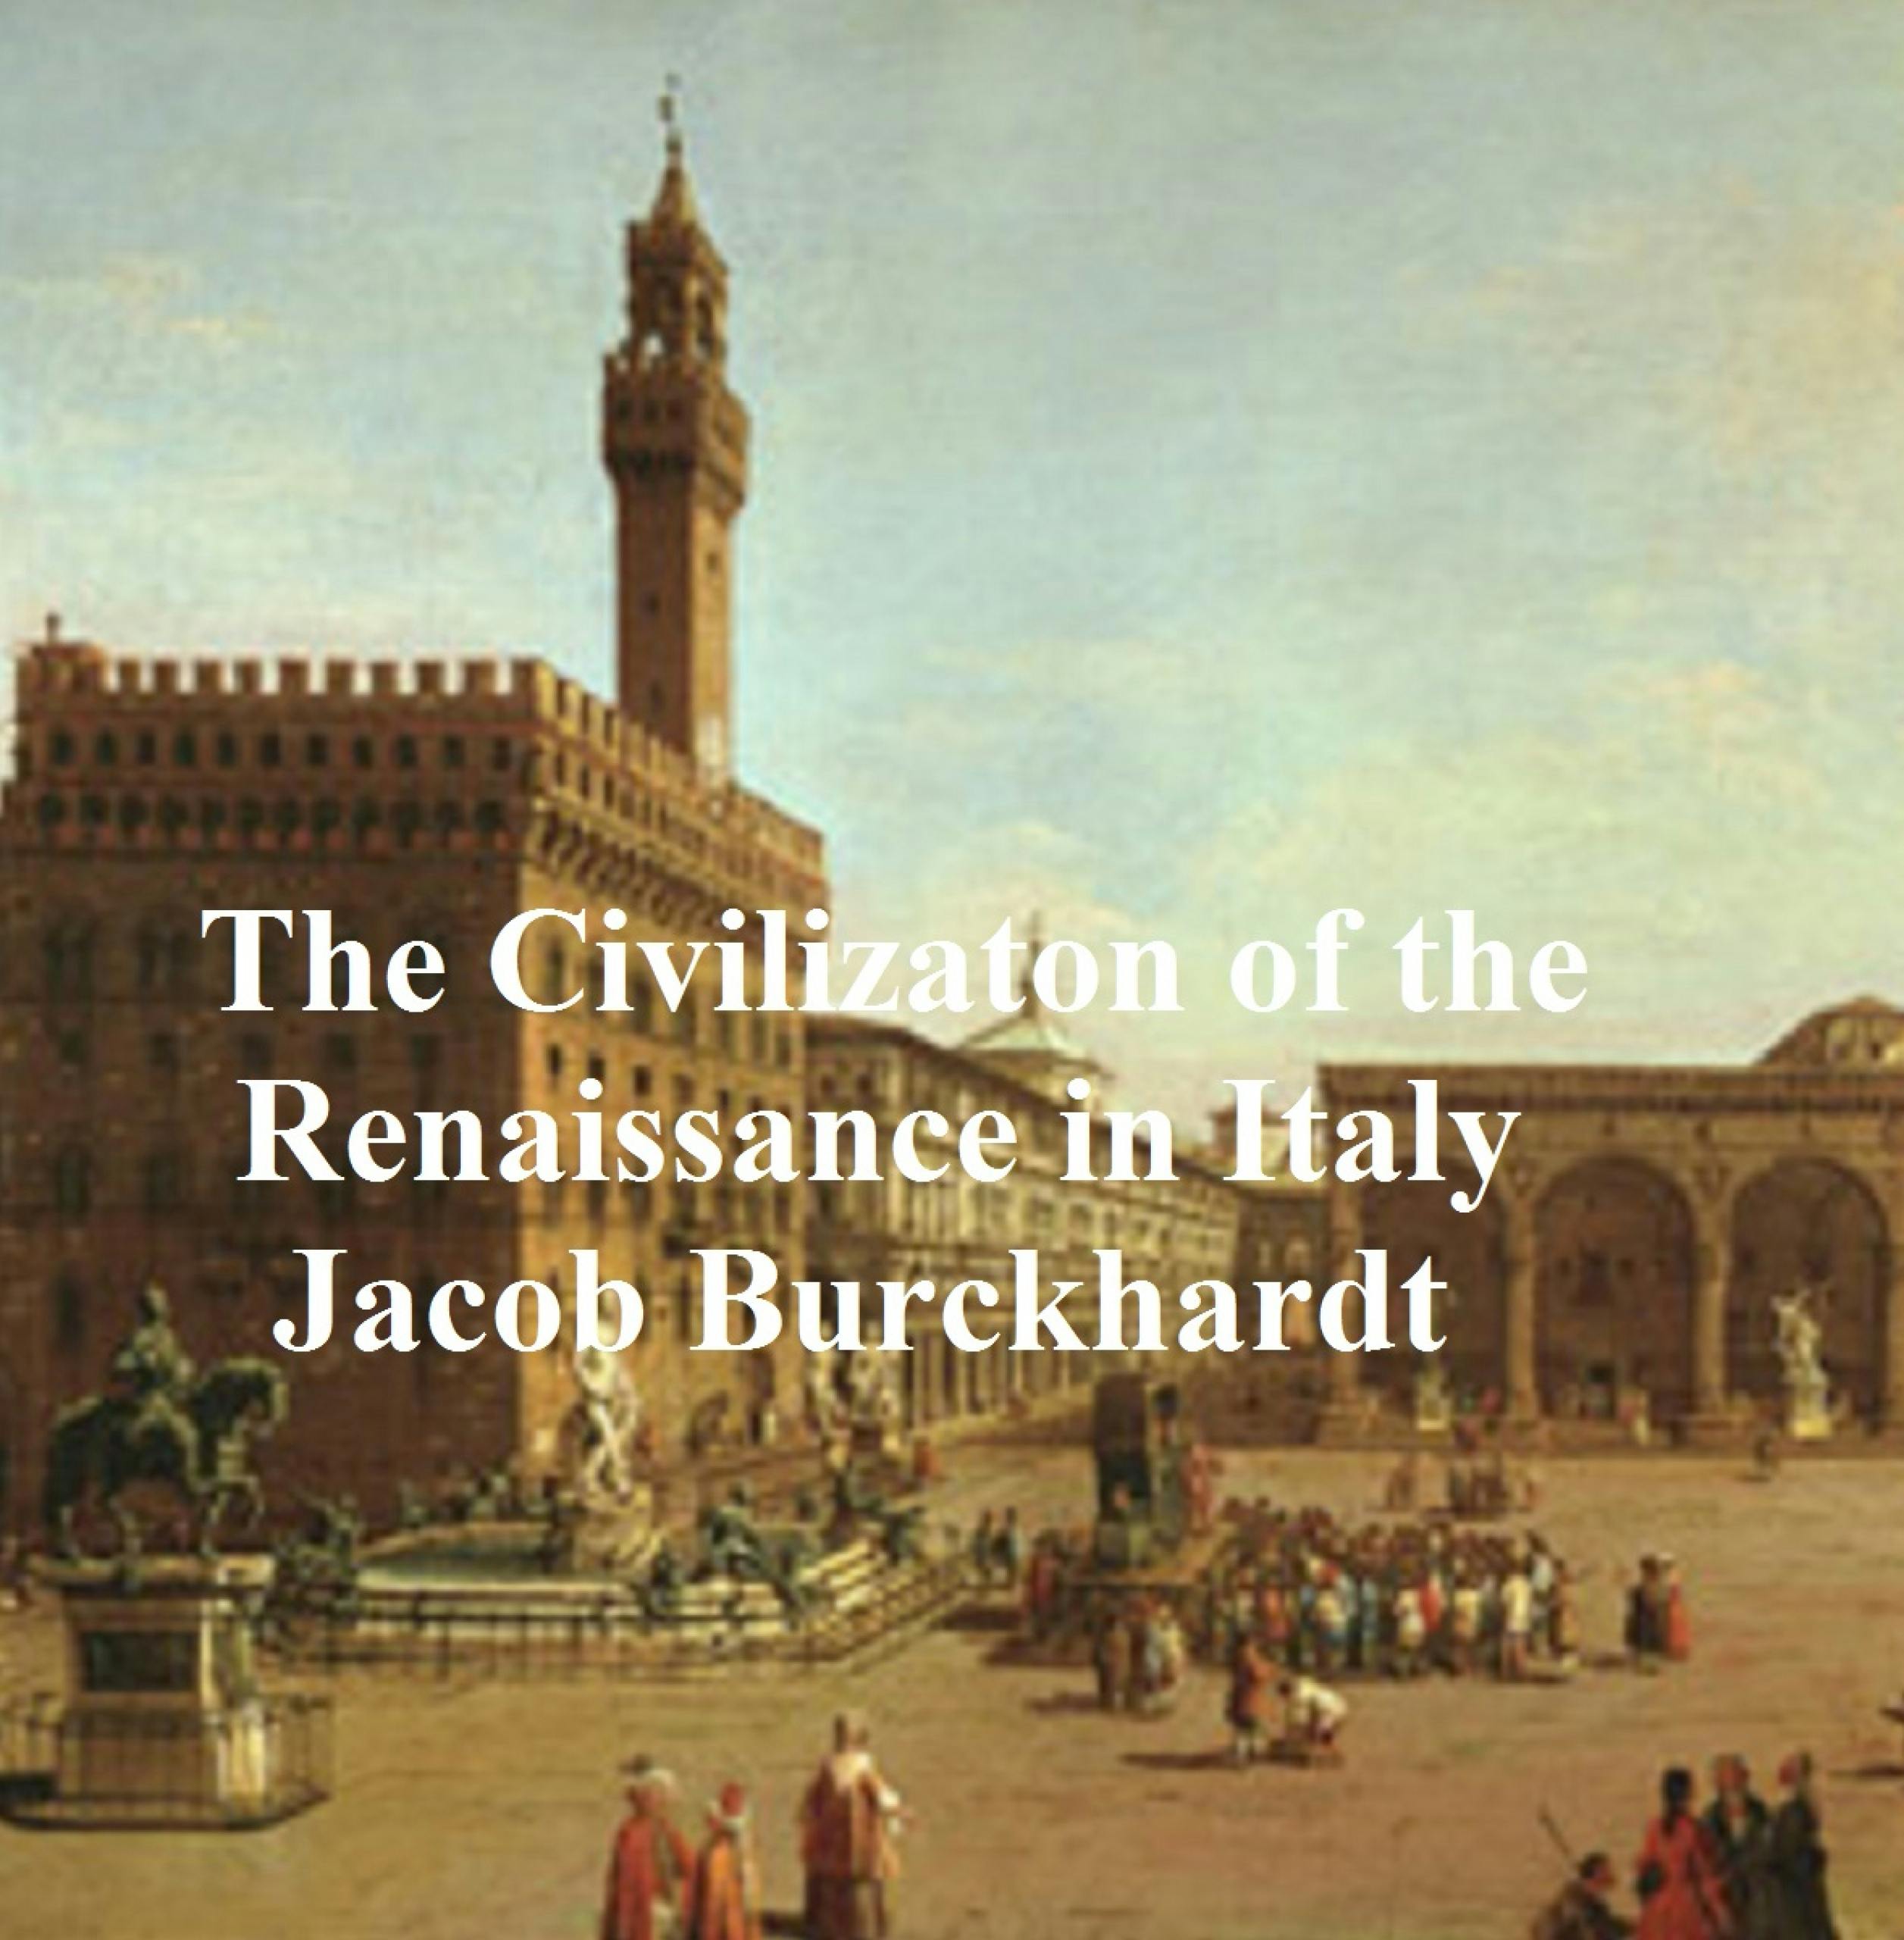 The Civilization of Renaissance in Italy - undefined